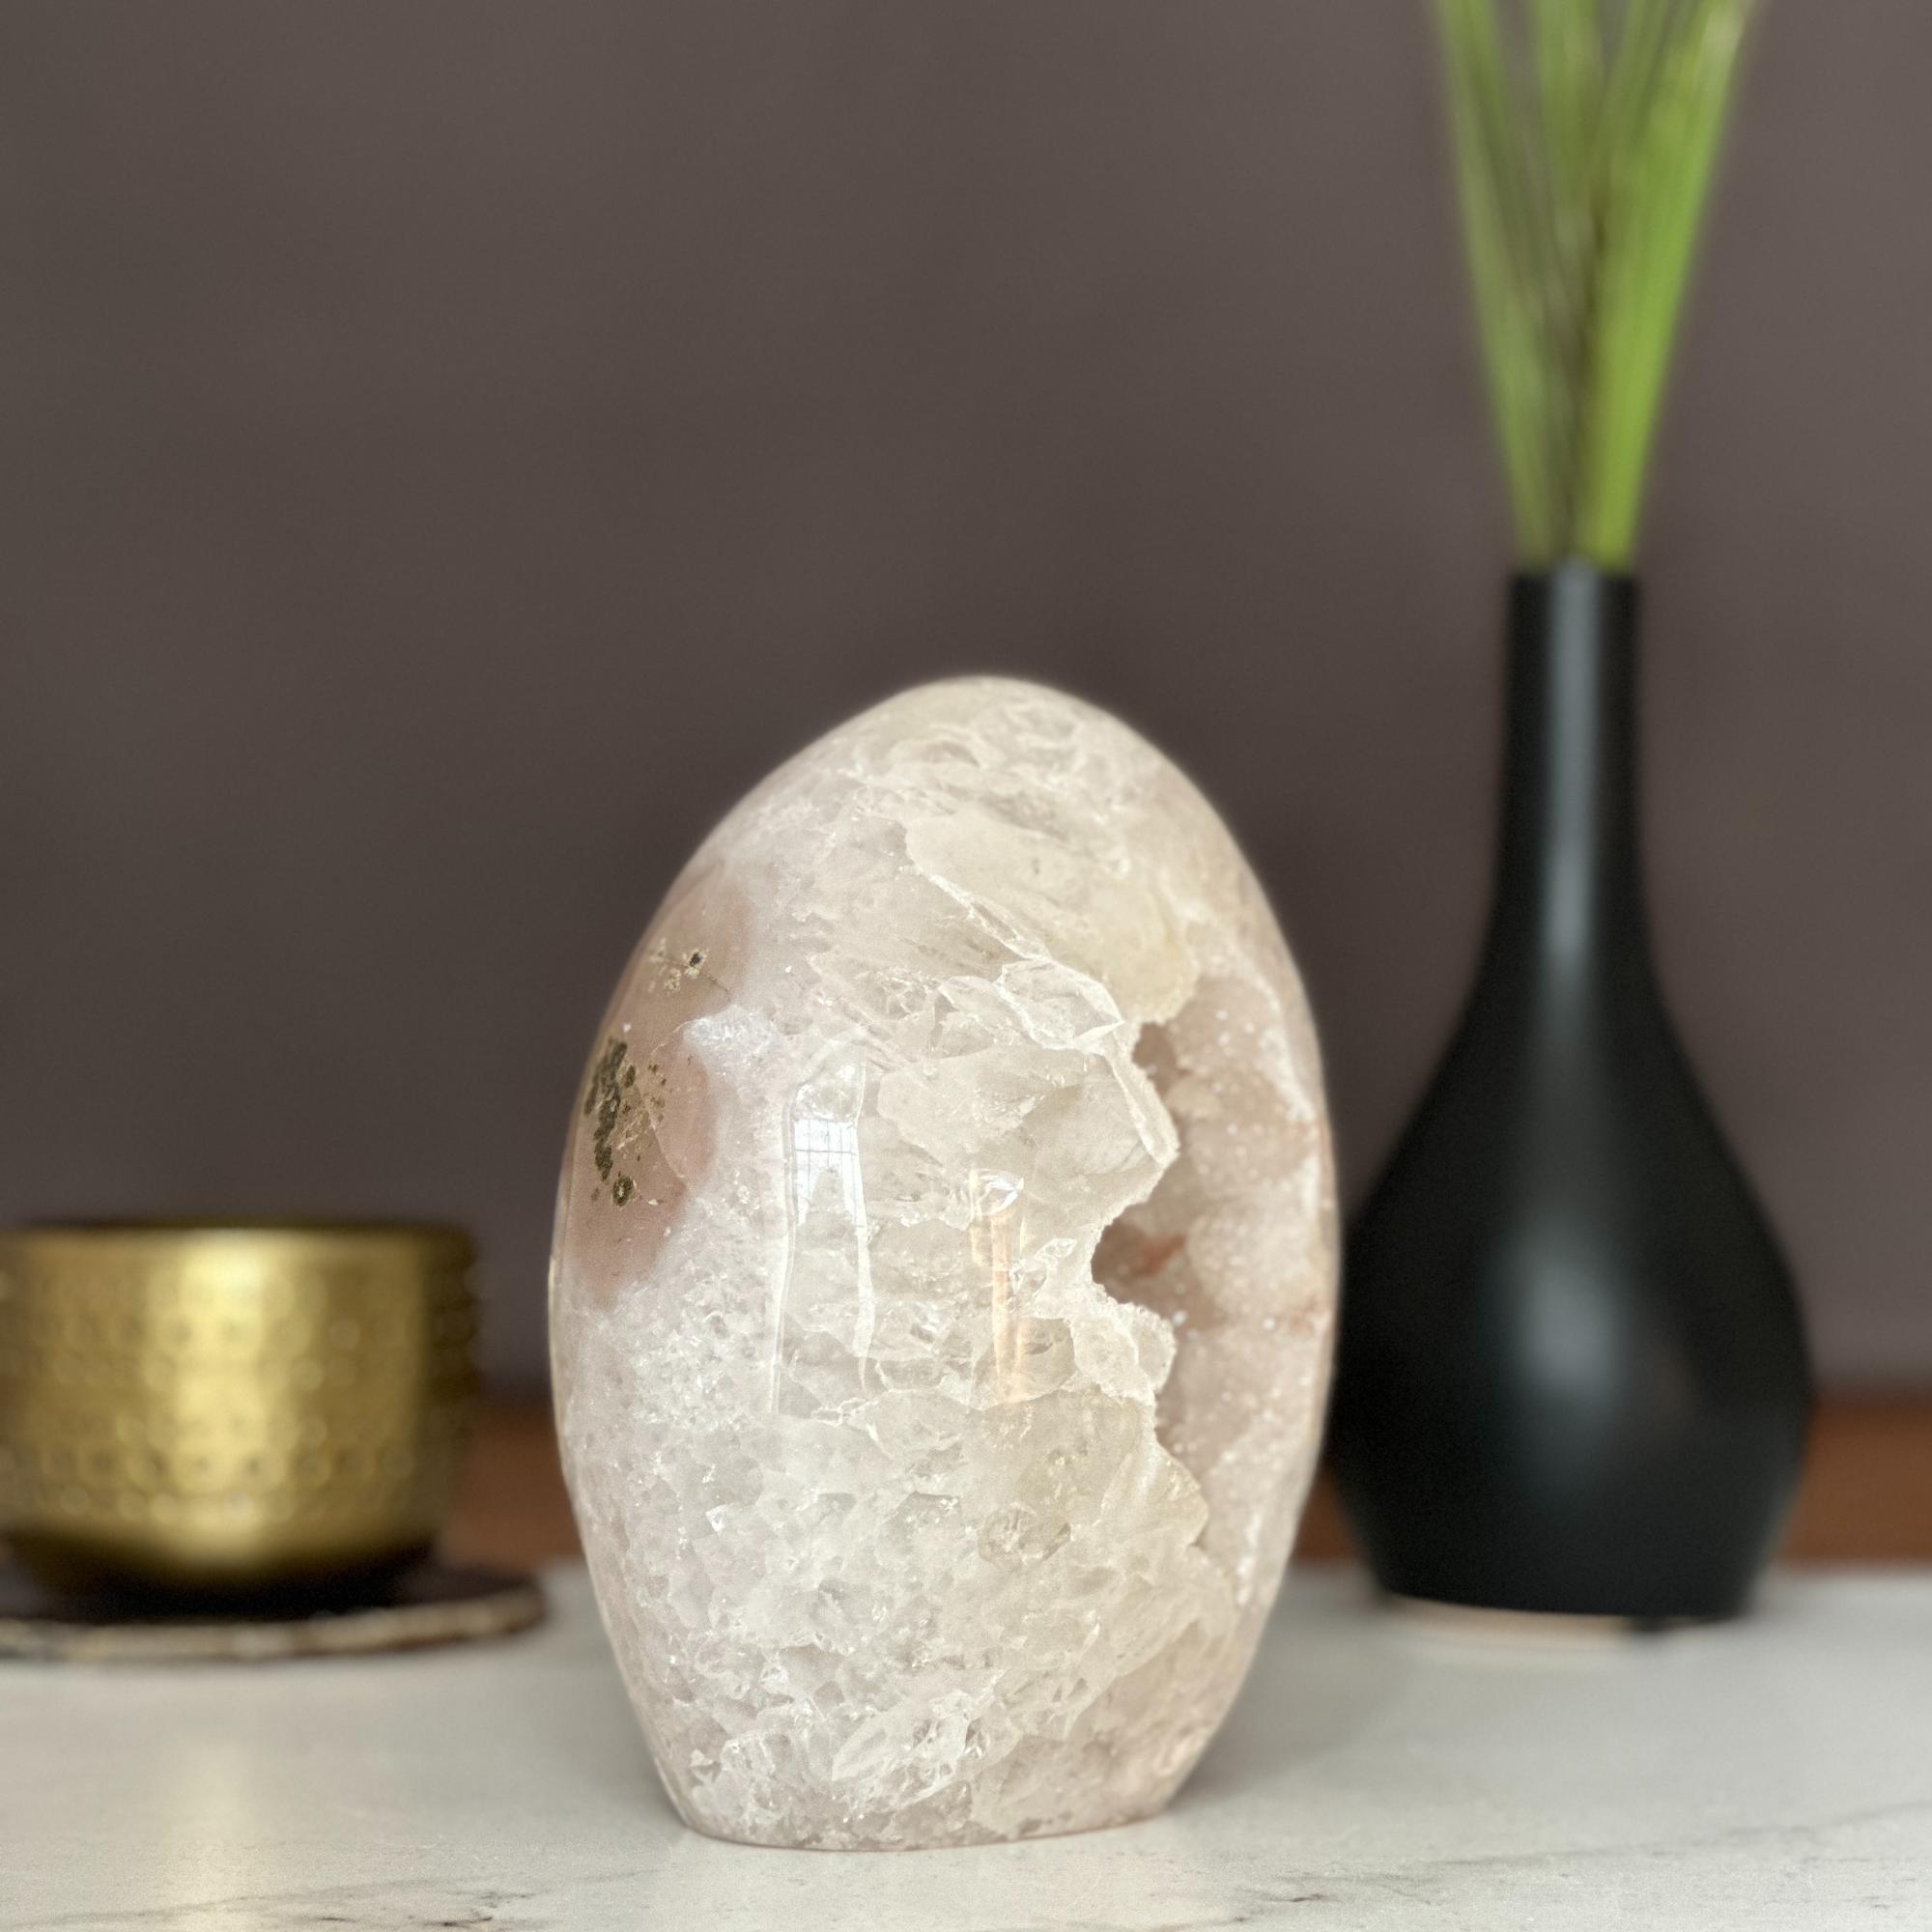 Superb Crystal Geode, Large Cave Egg shaped, White Quartz for collectors, 7 in Tall Full polished stone, Stunning decor AAA Crystal no